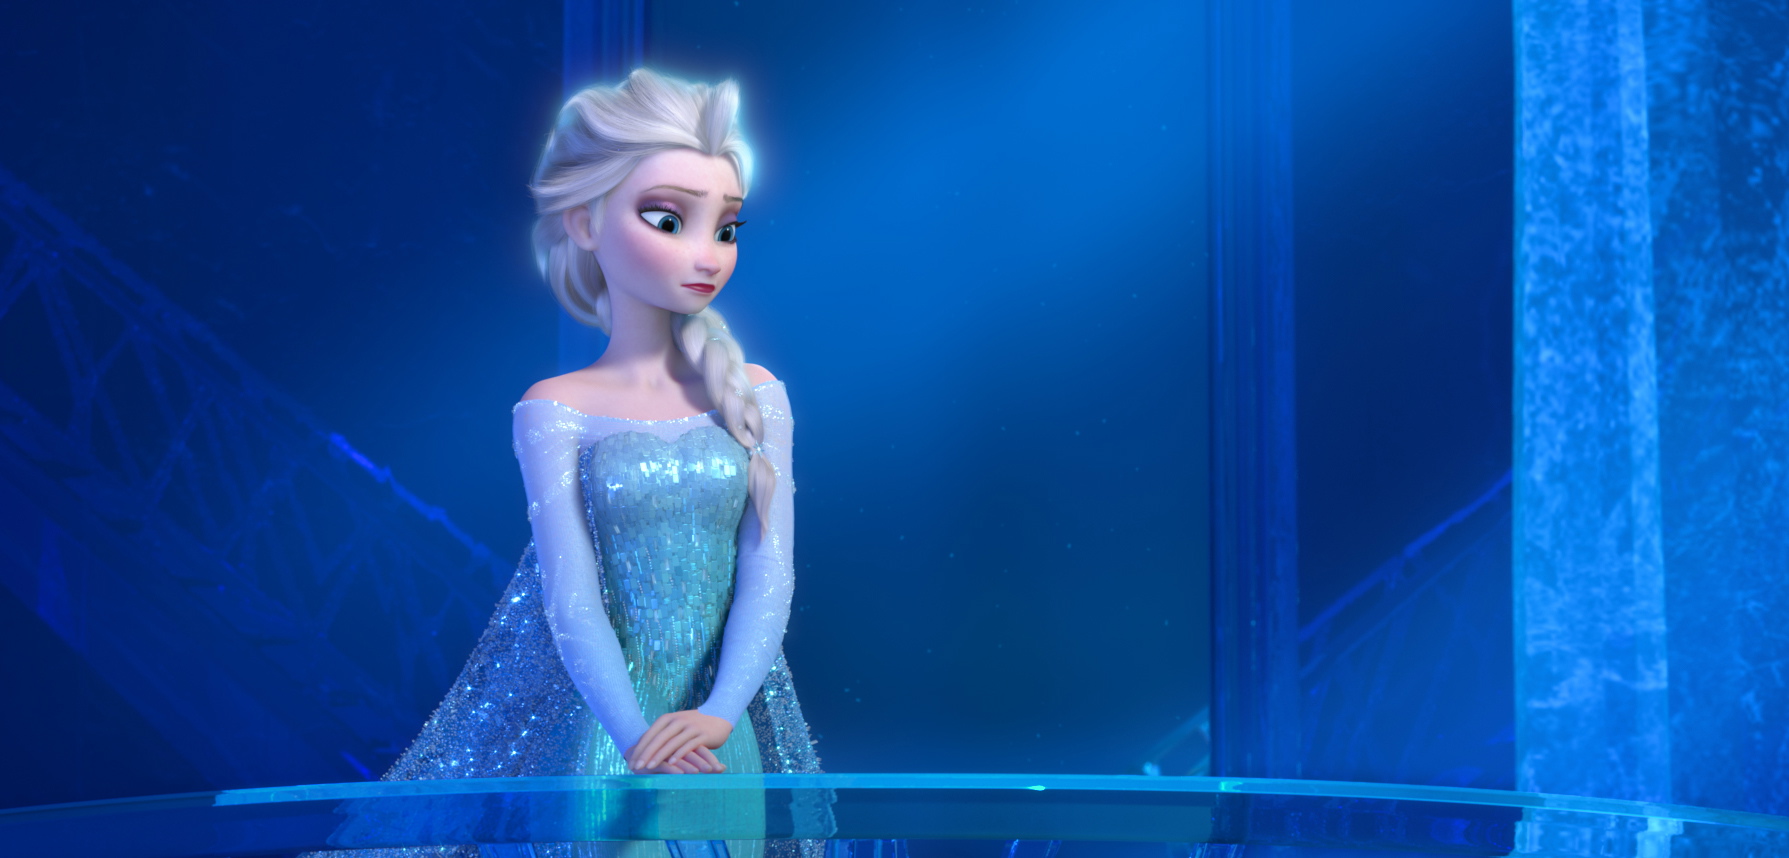 Screenwriter Jennifer Lee shares a directing credit on &quot;Frozen,&quot; which tells the story of Elsa the Snow Queen, right, voiced by Maia Mitchell.